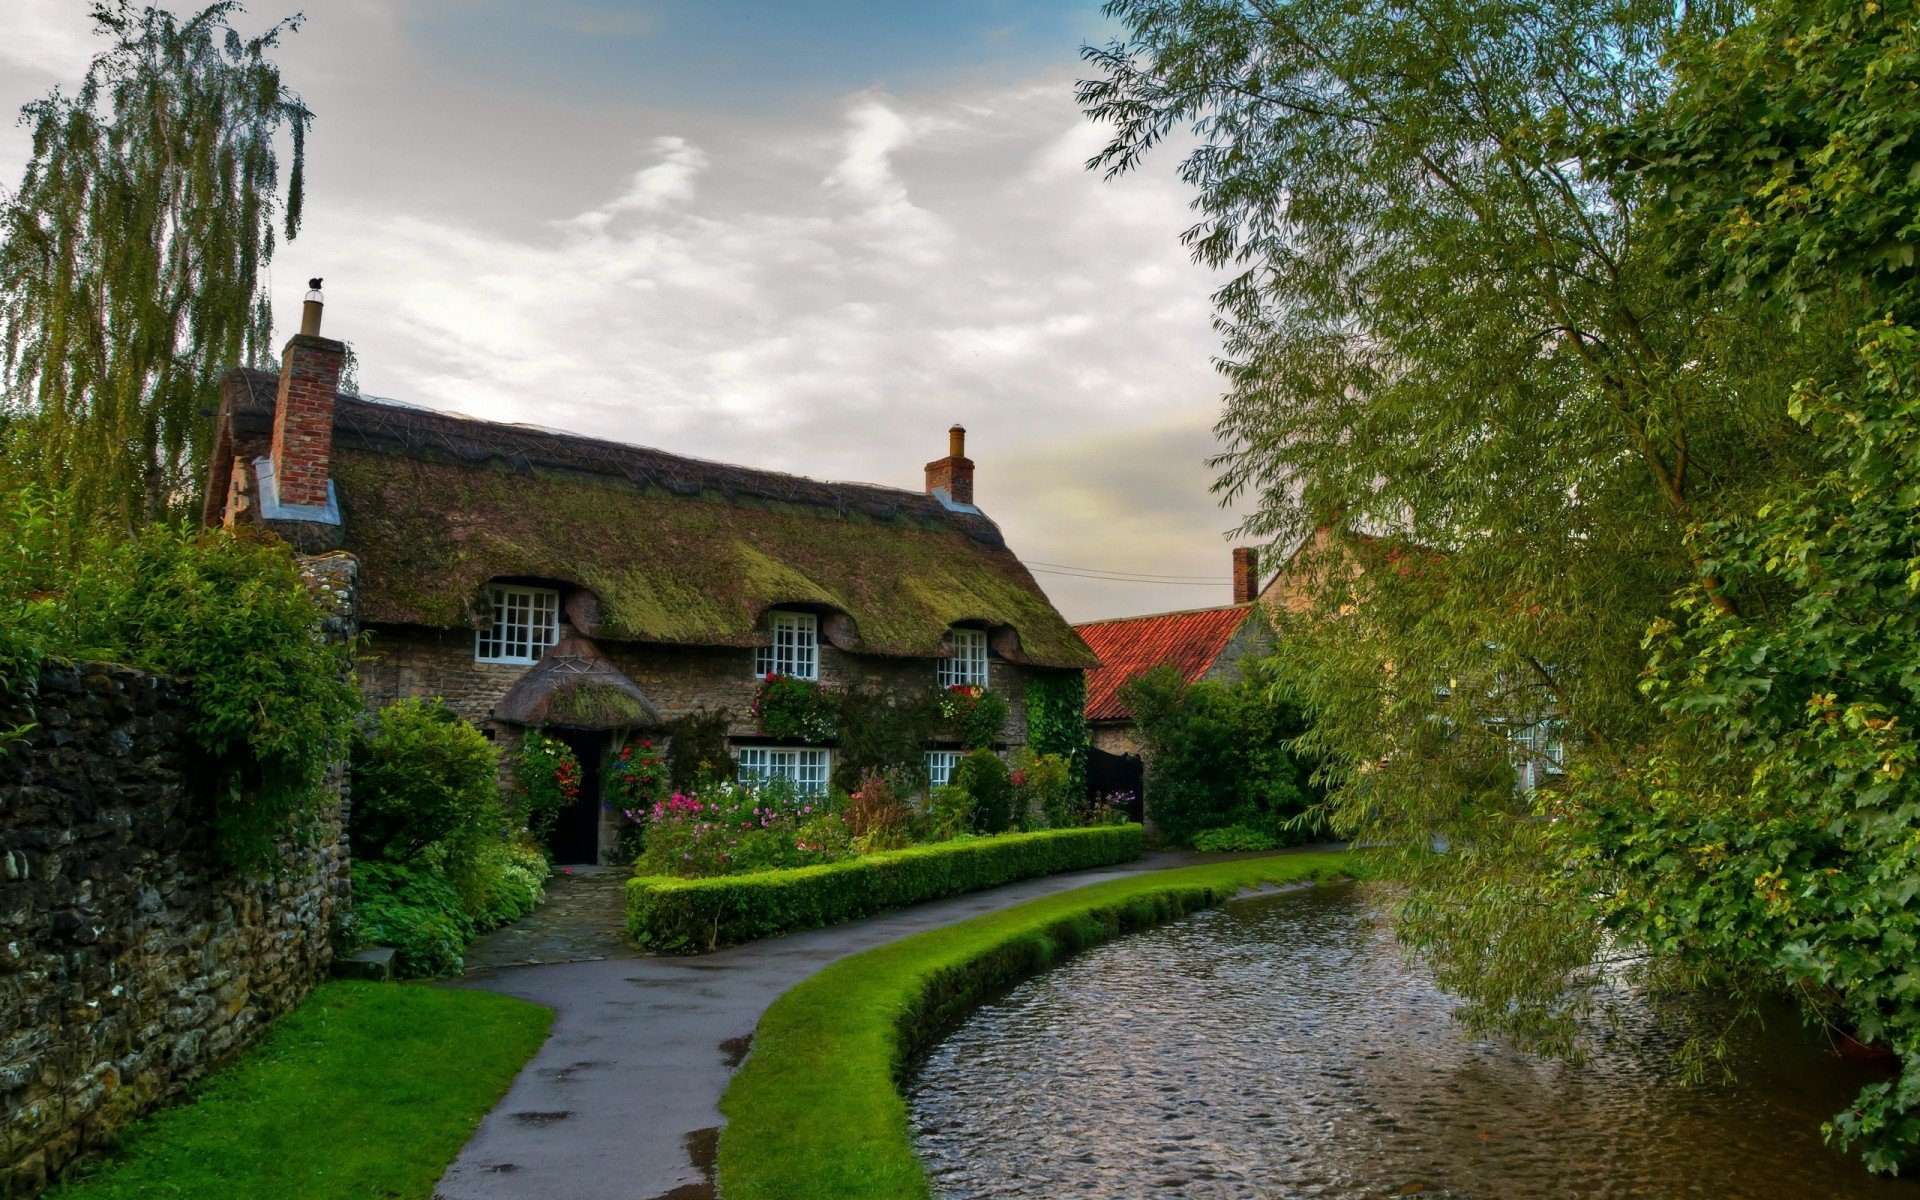 House  regarding River in England HD Wallpaper | Background Image  